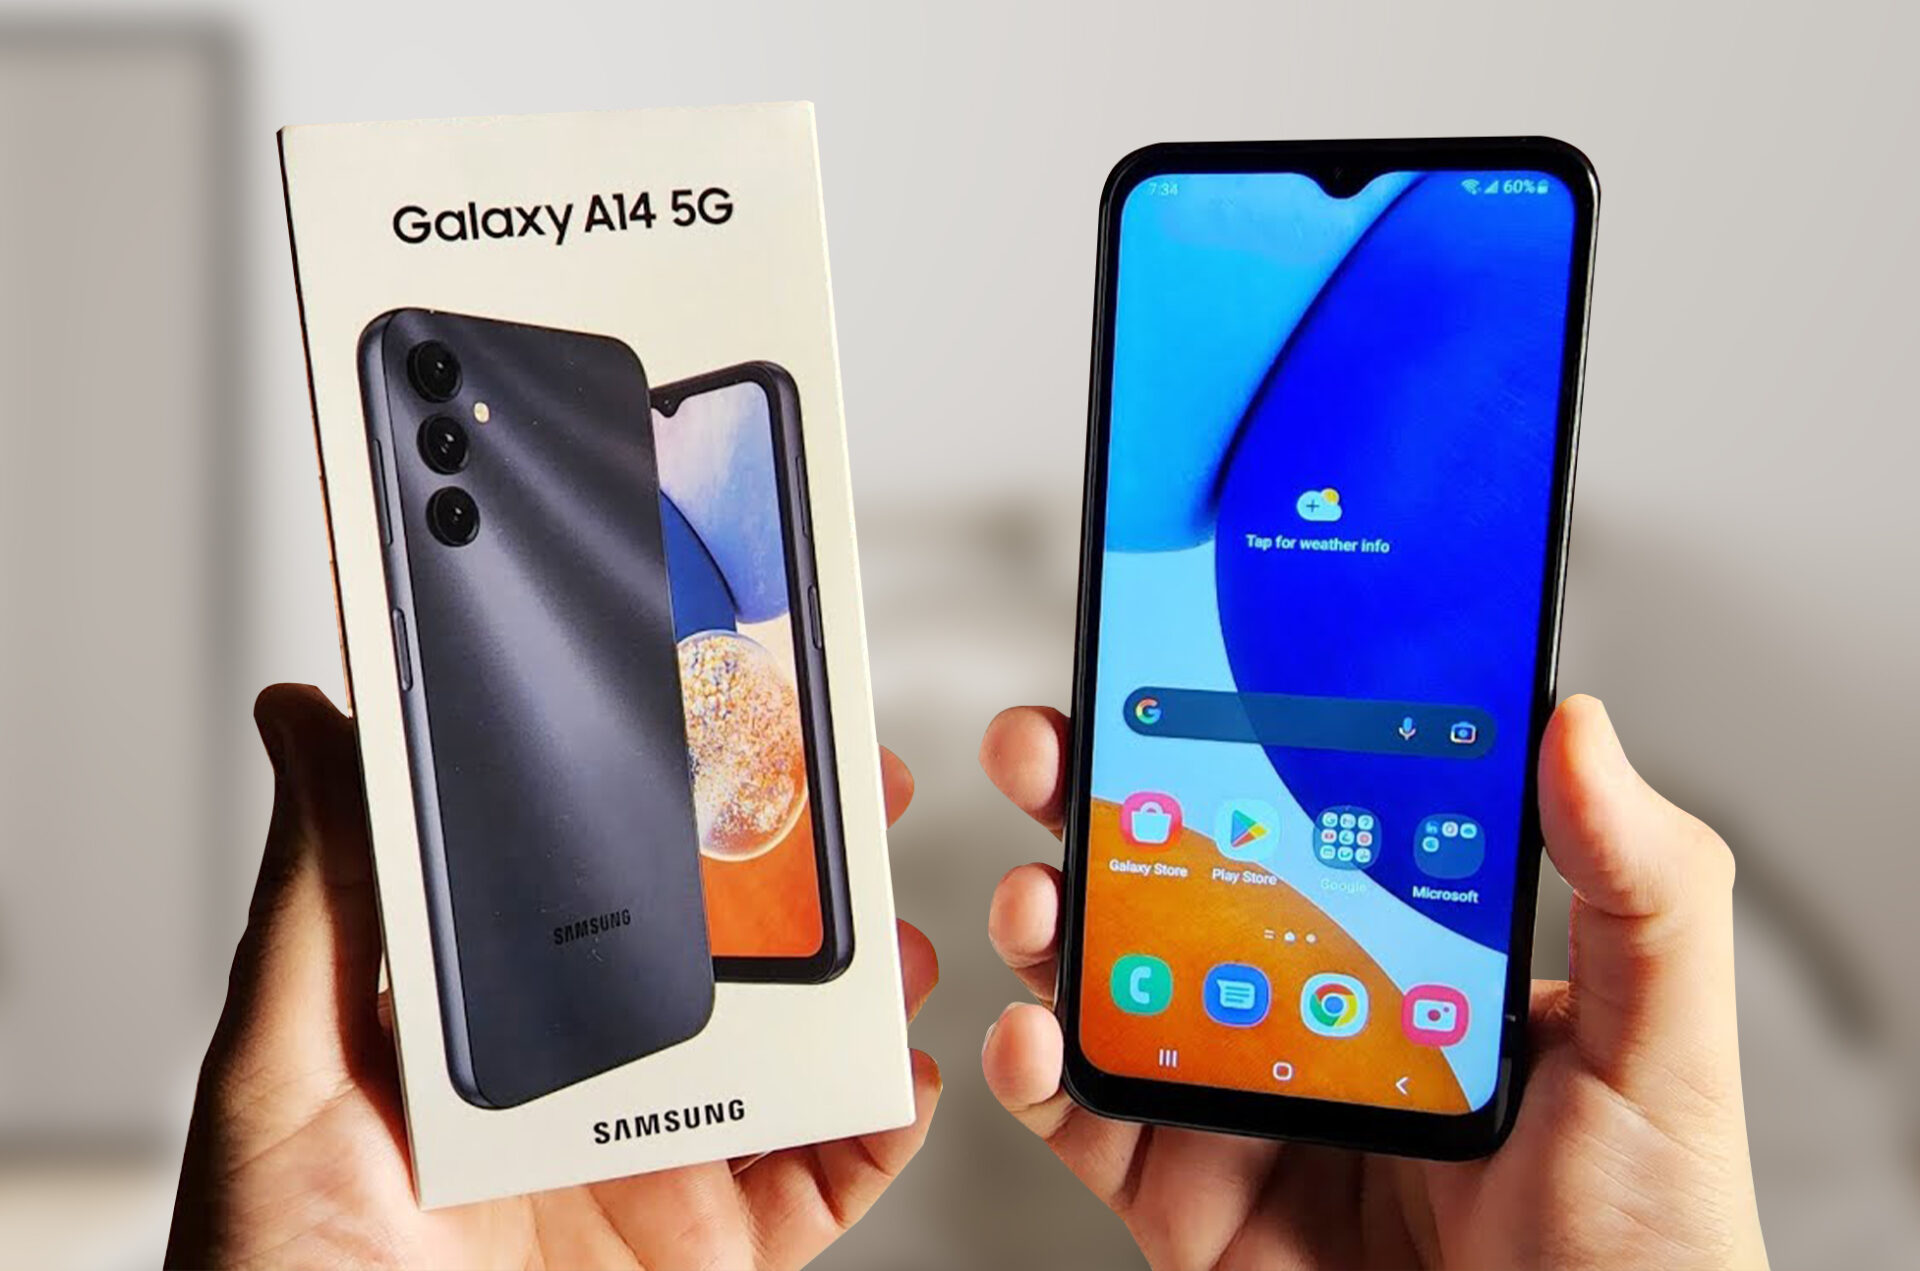 Samsung Galaxy A14 5G with Android 13 out of the box is revealed